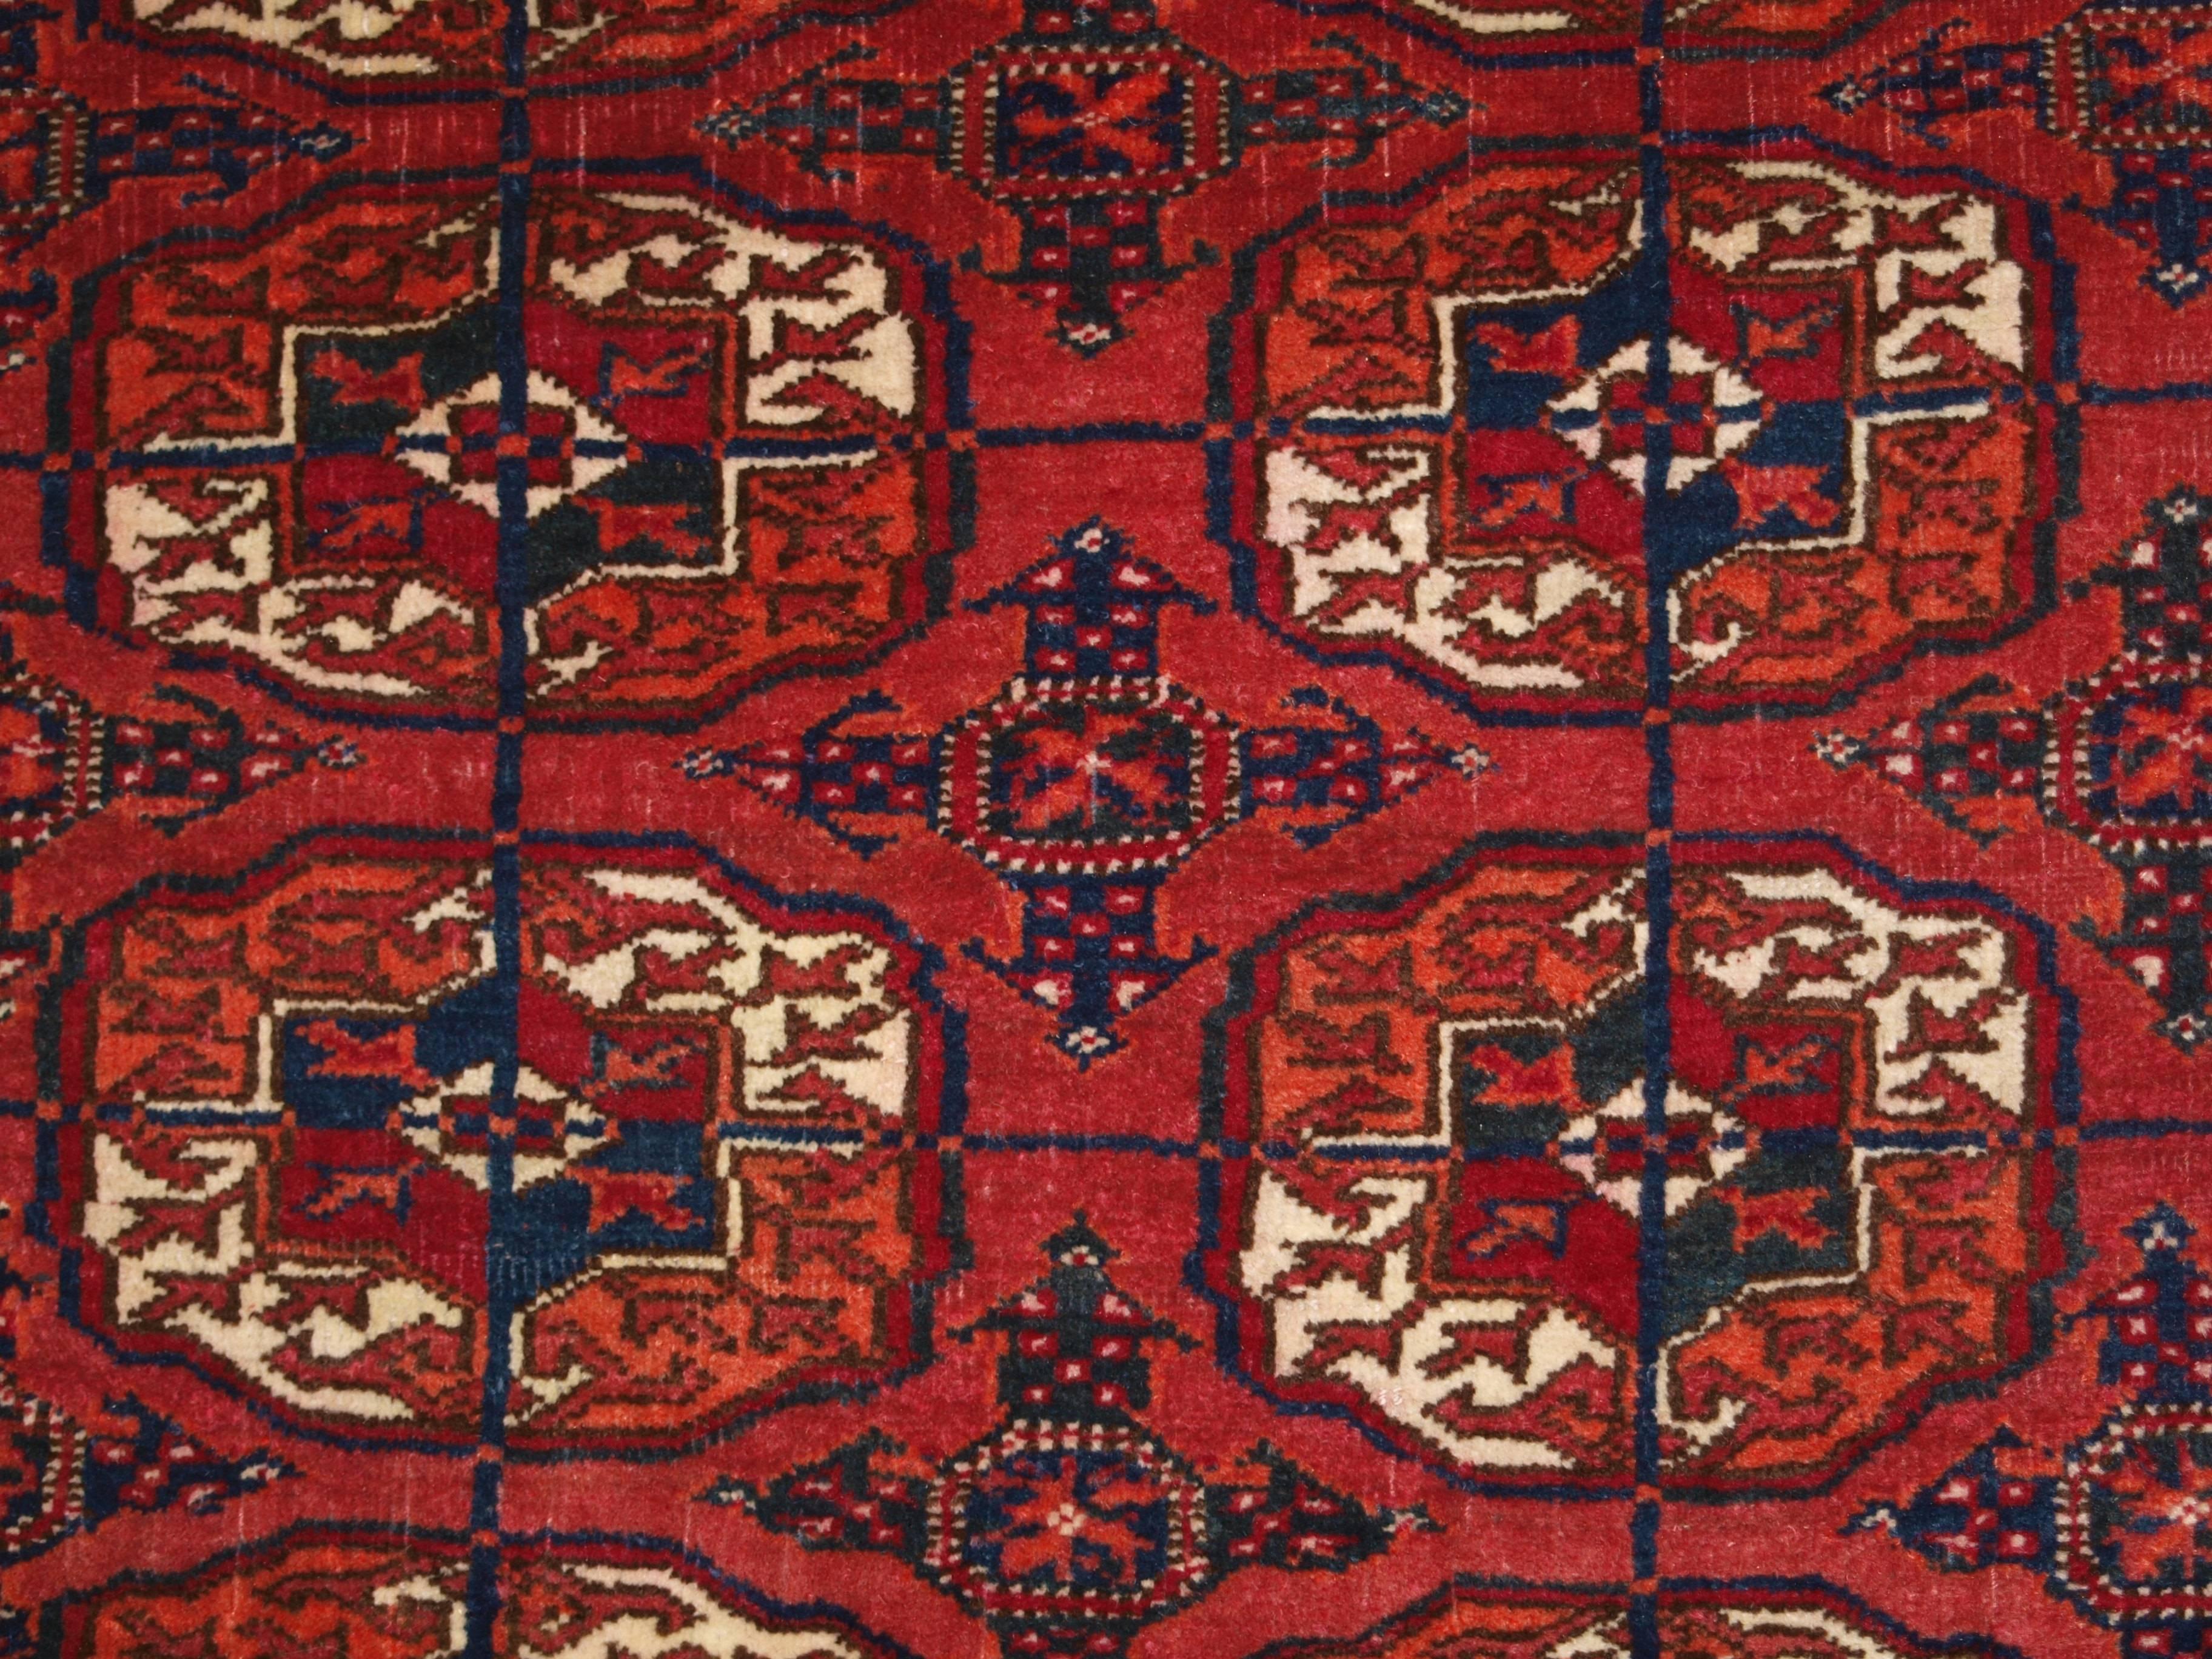 Size: 5ft 8in x 3ft 11in (172 x 119cm).

Antique Tekke Turkmen ‘dip khali’ rug of small size. 

circa 1900.

These are considered to be ‘half size’ rugs, half the length and half the width of a main carpet. 

This example has three rows of